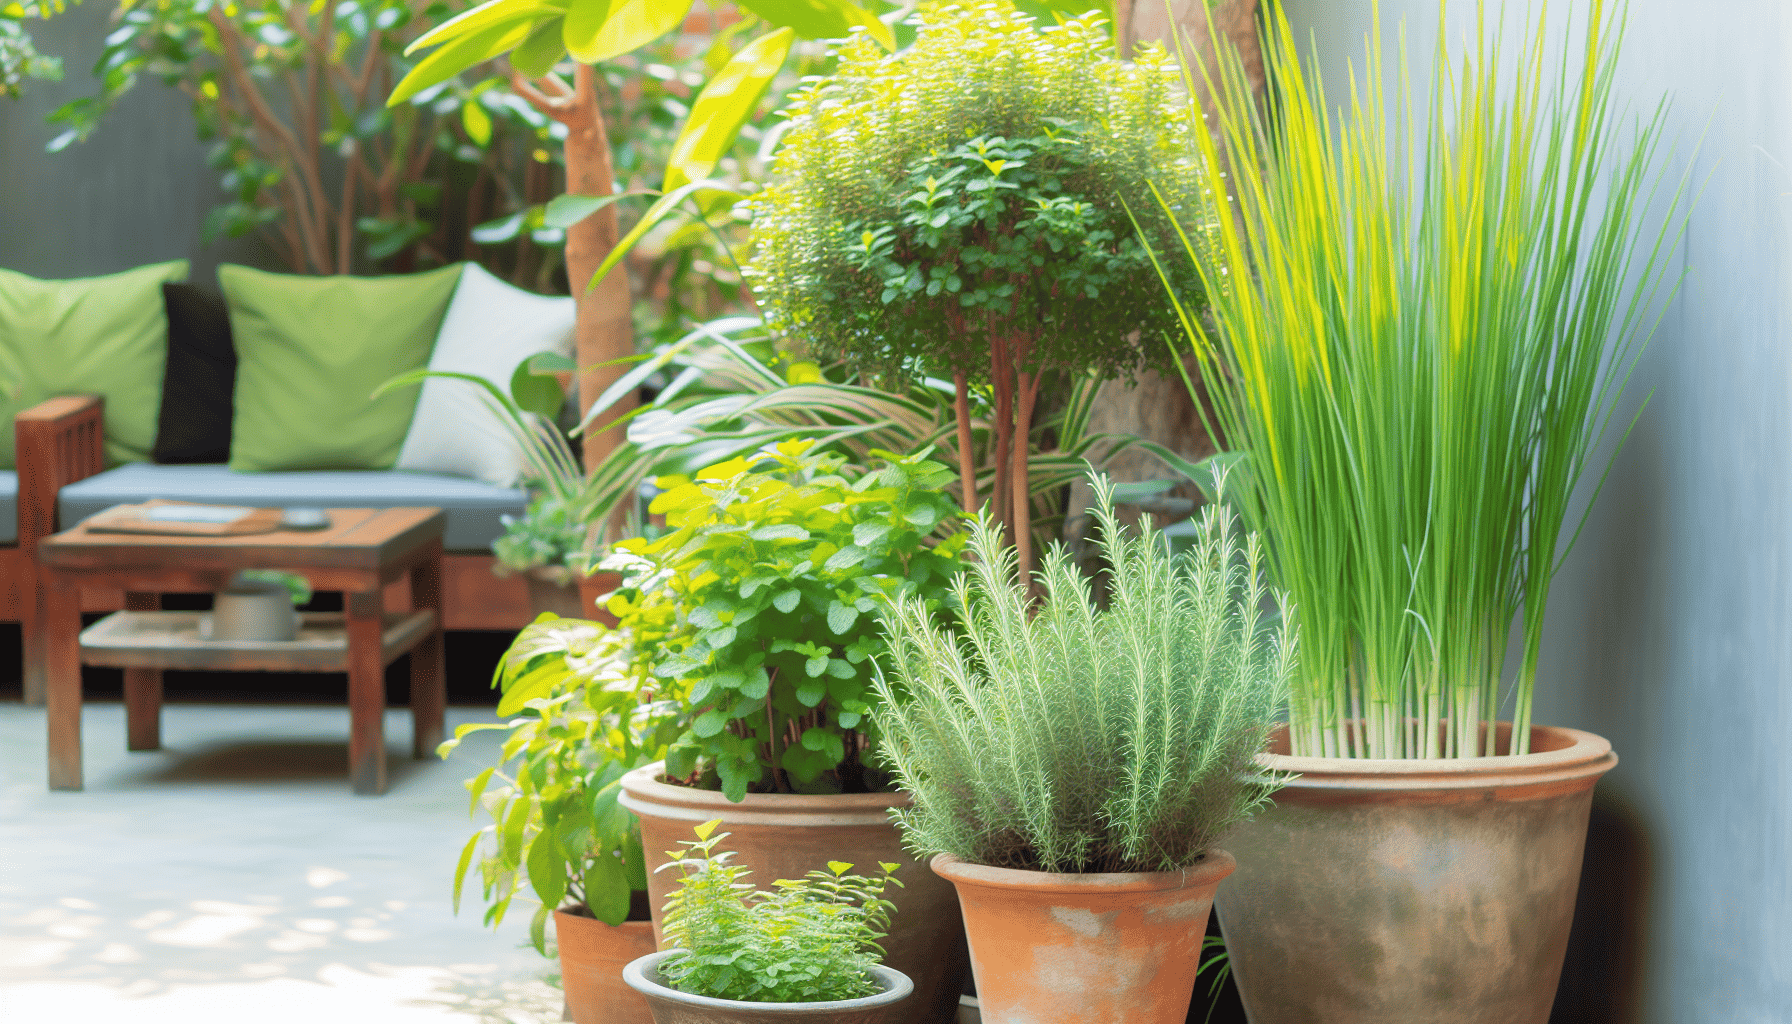 Container garden with mint, lemongrass, and rosemary